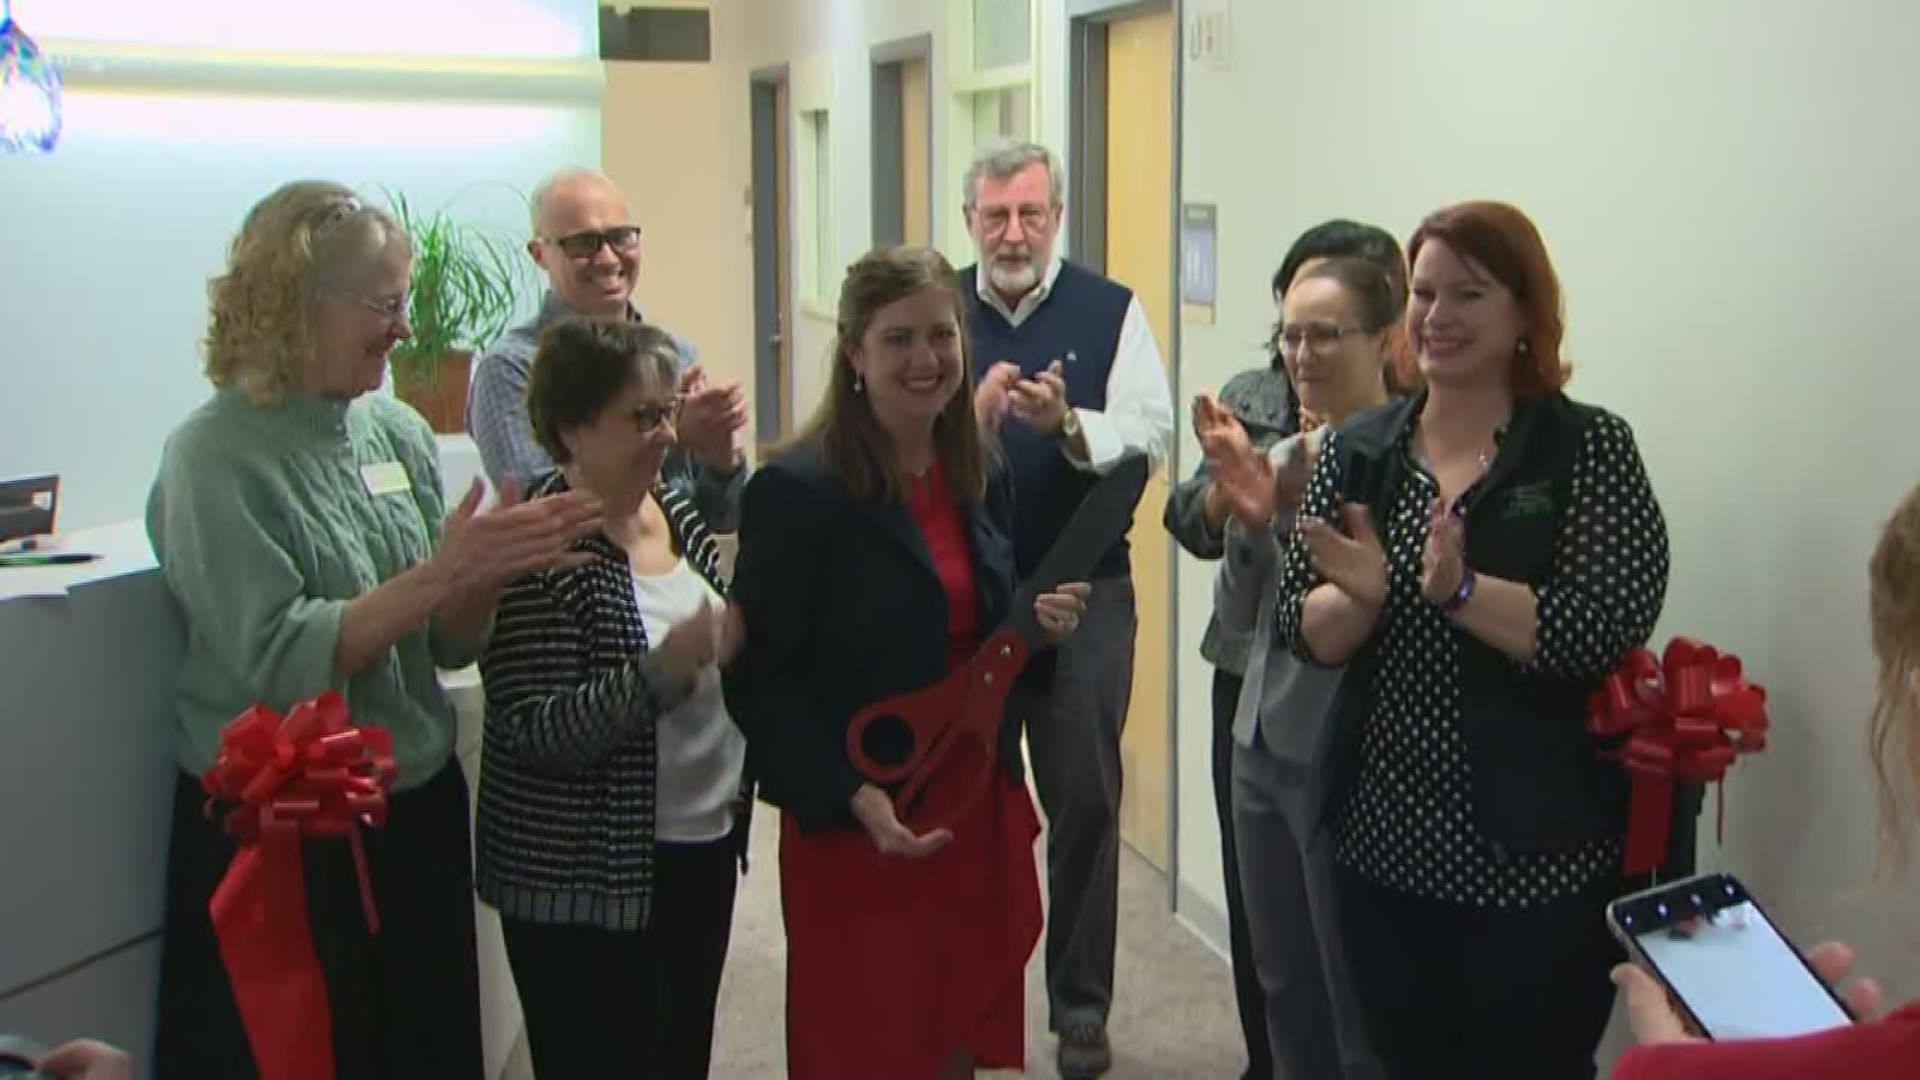 Ribbon-cutting for the new cancer care center in Monroe, Washington.